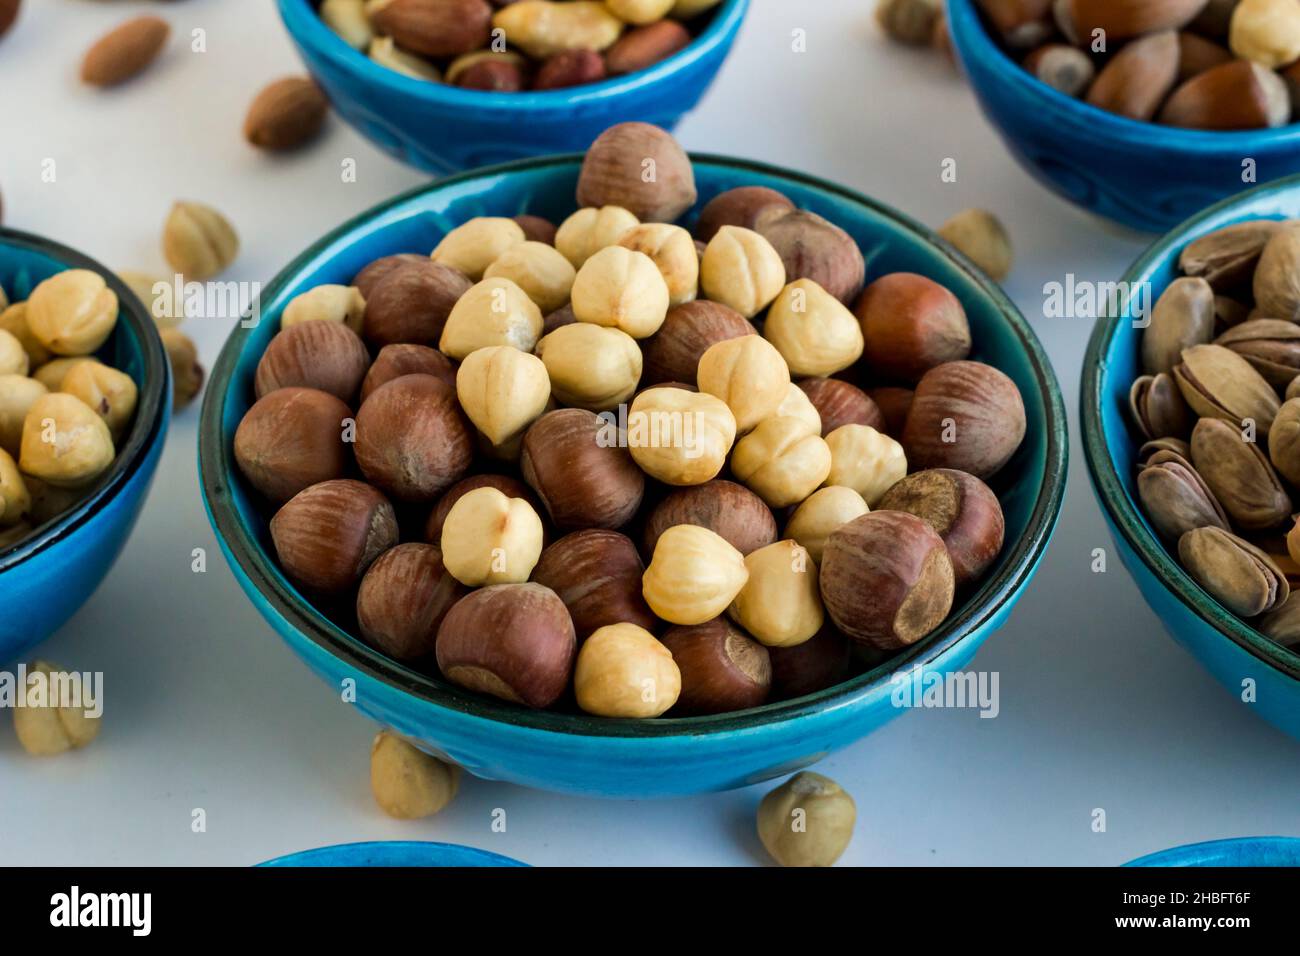 Shelled and unshelled luxury hazelnuts in a blue ceramic bowl on white surface Stock Photo